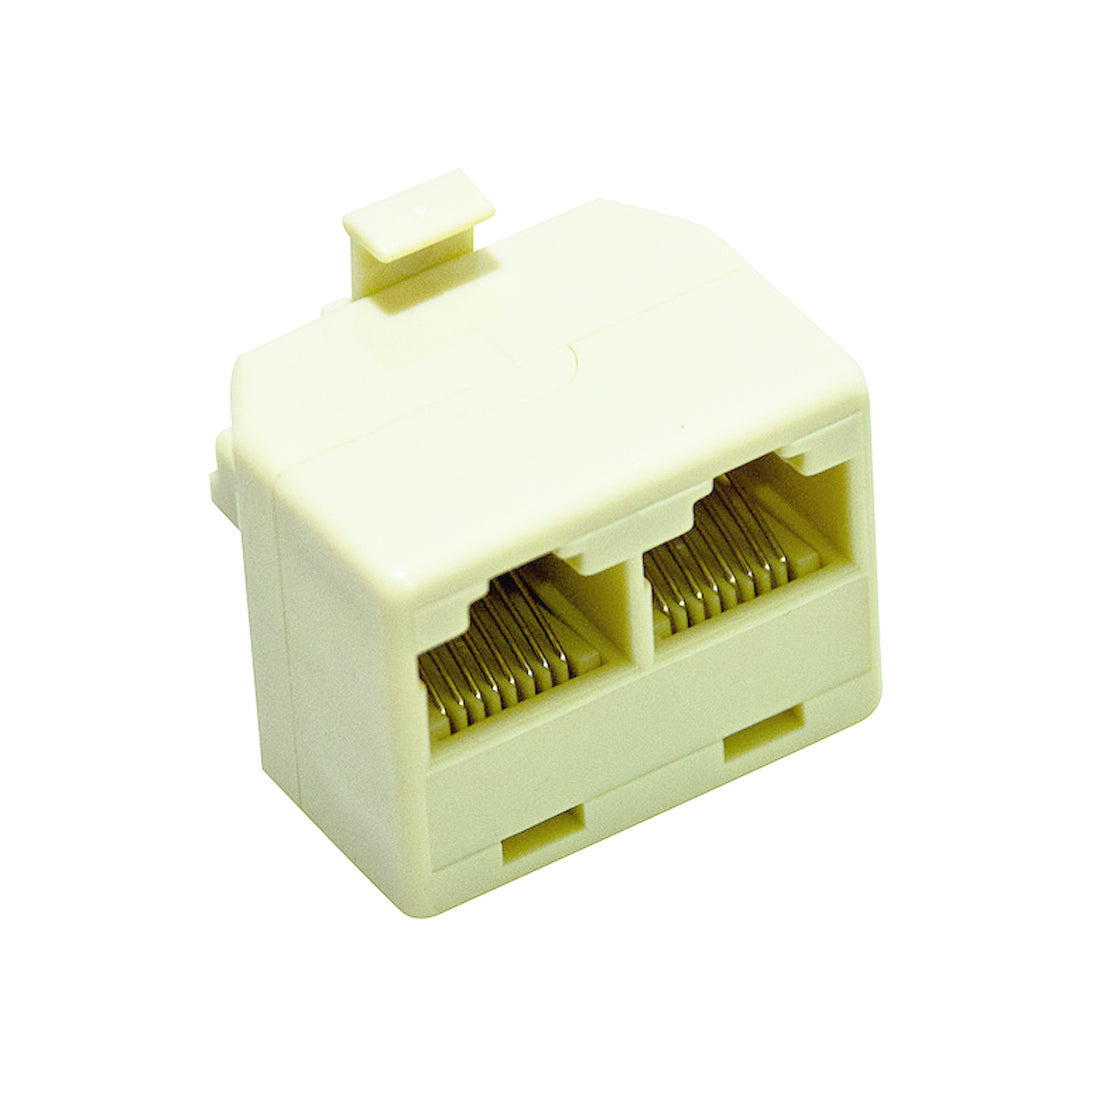 Life Pin to Pin modular adapter for 8-pin telephone network, RJ adapter